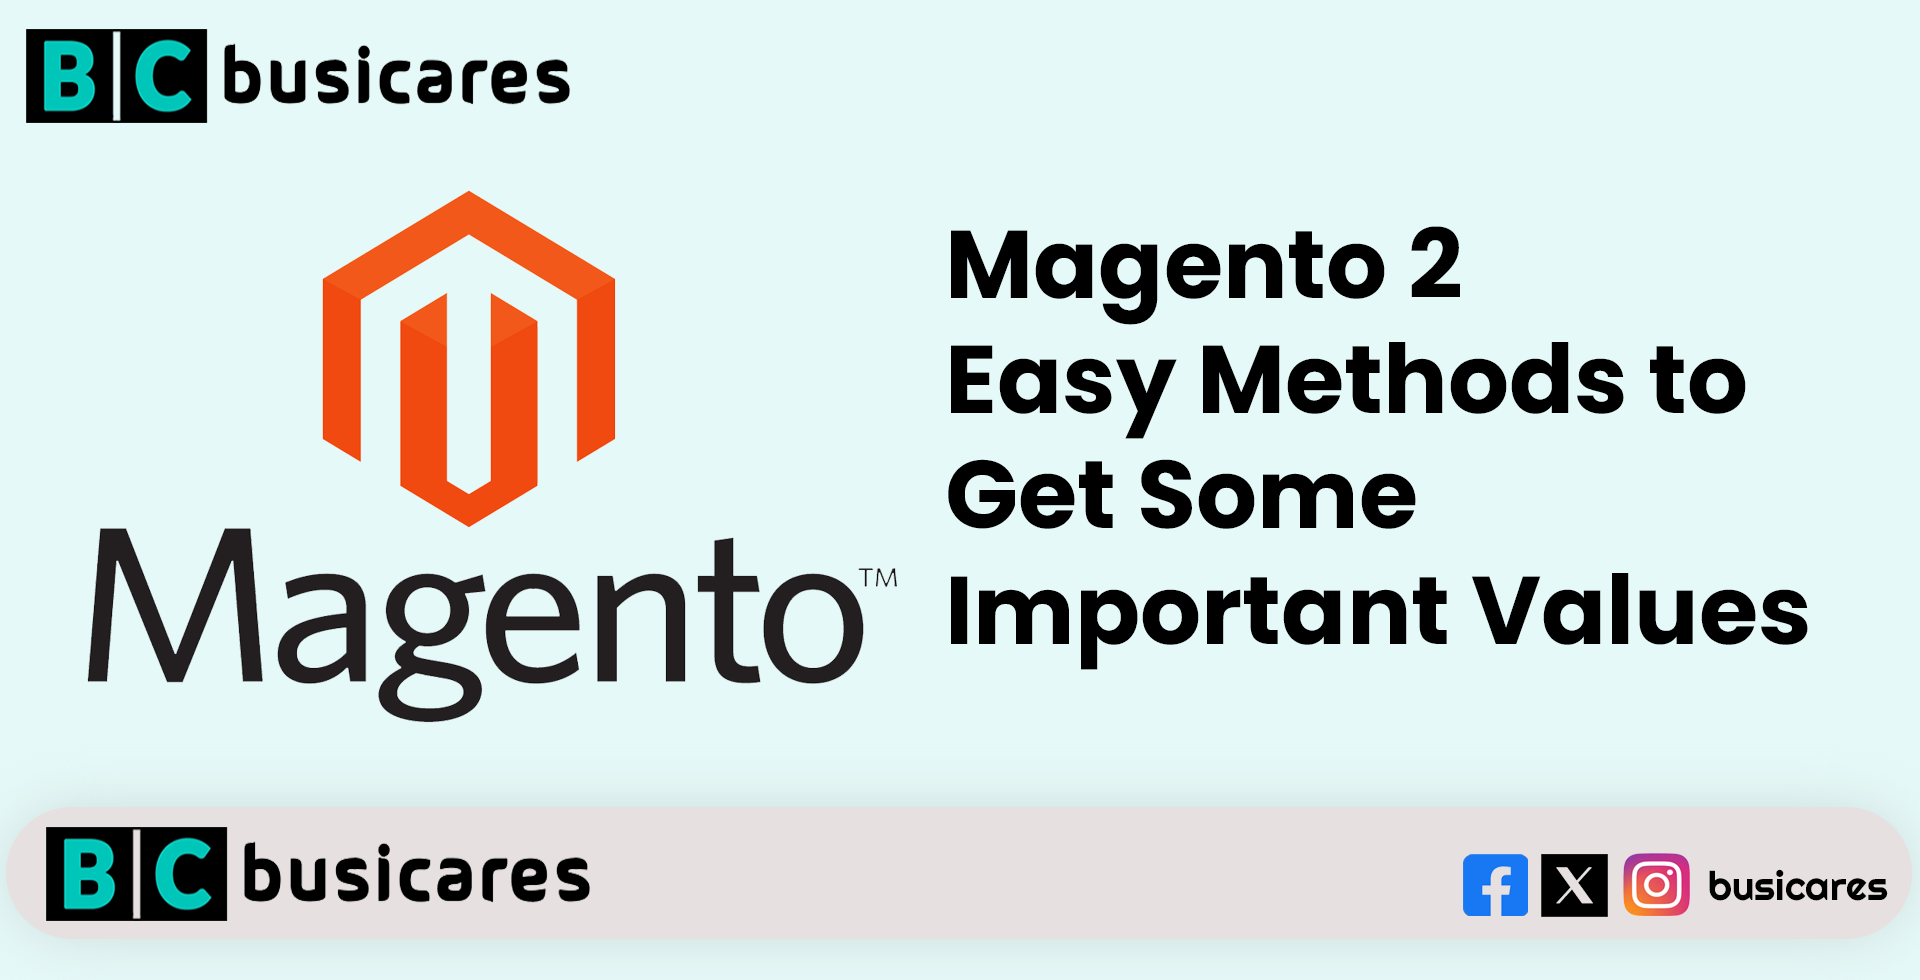 Busicares Solutions - Magento 2
Easy Methods to 
Get Some 
Important Values